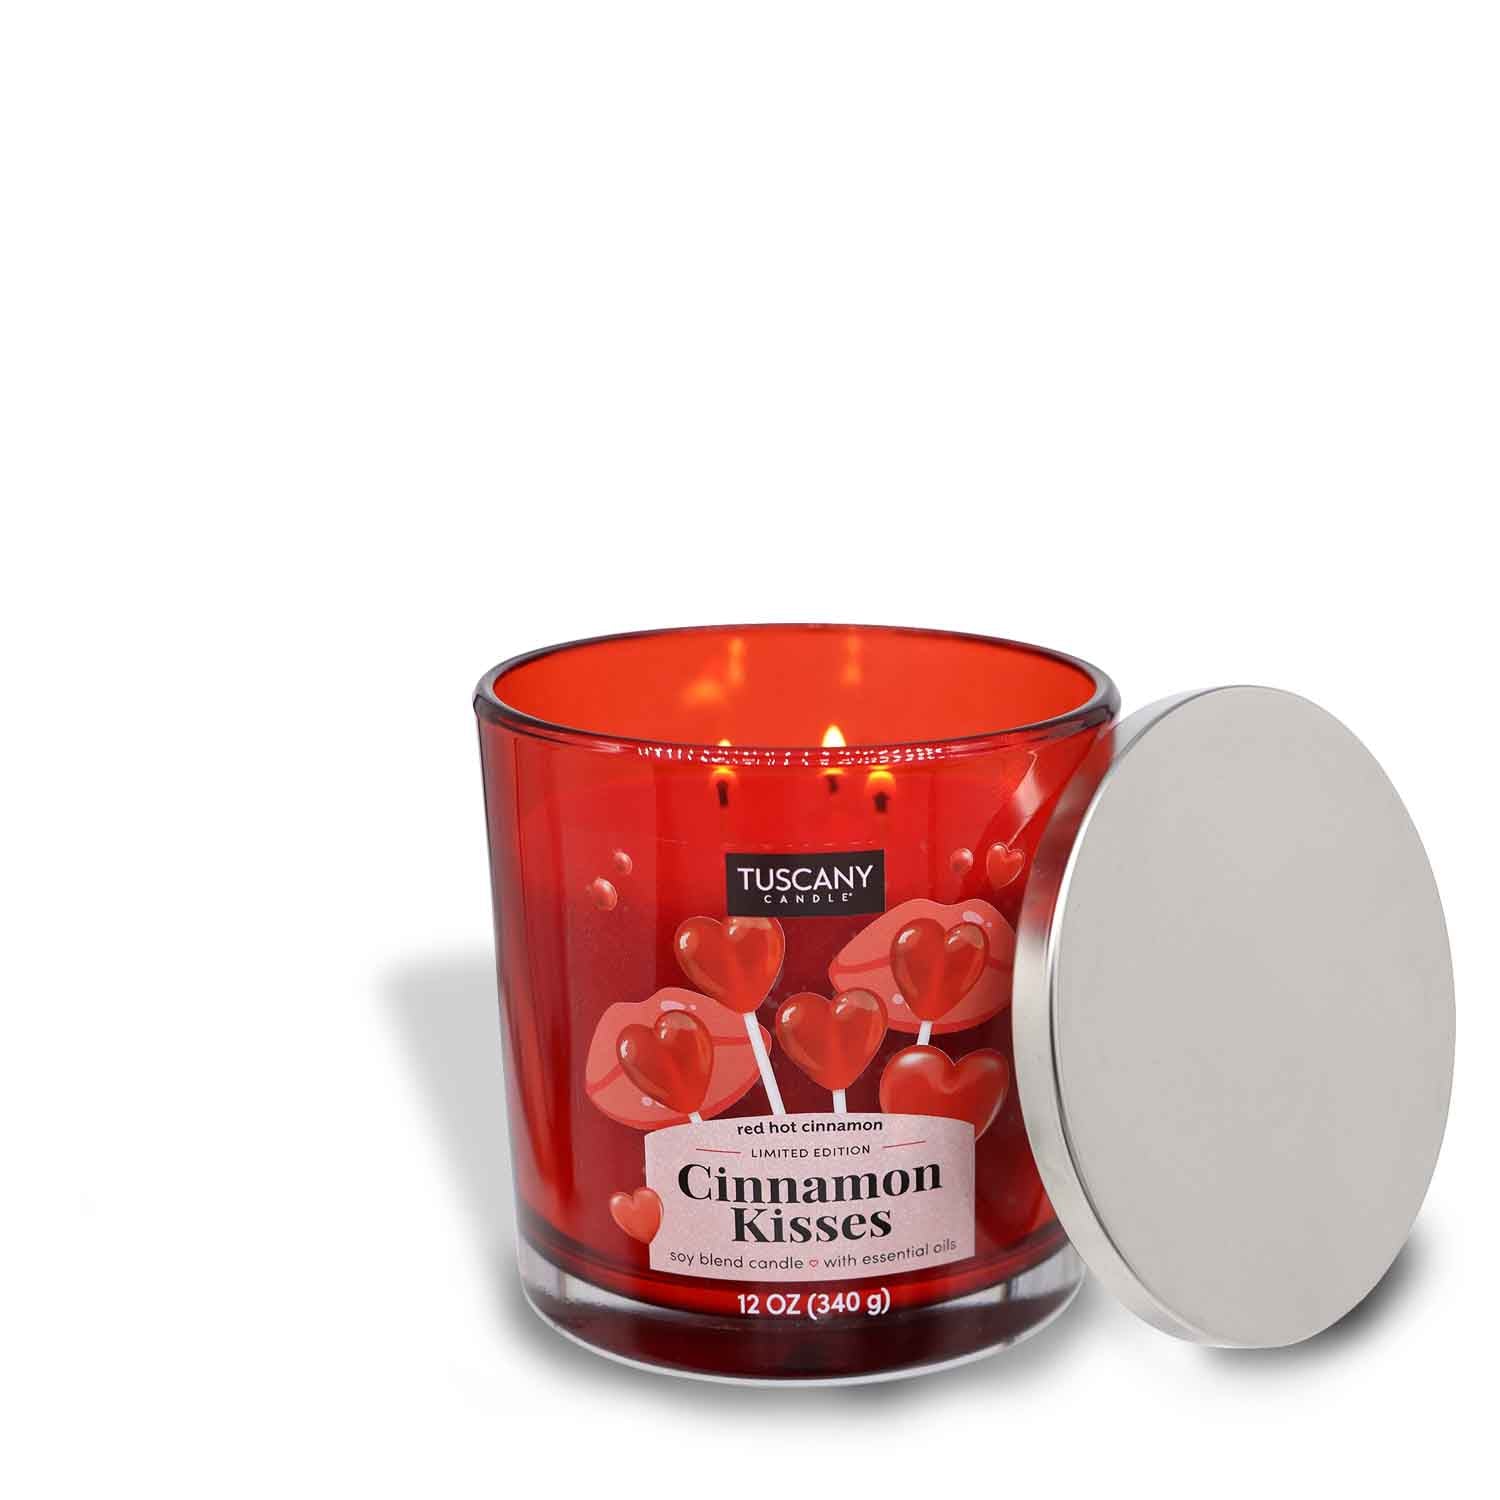 A Cinnamon Kisses scented candle with a red lid from Tuscany Candle® SEASONAL.